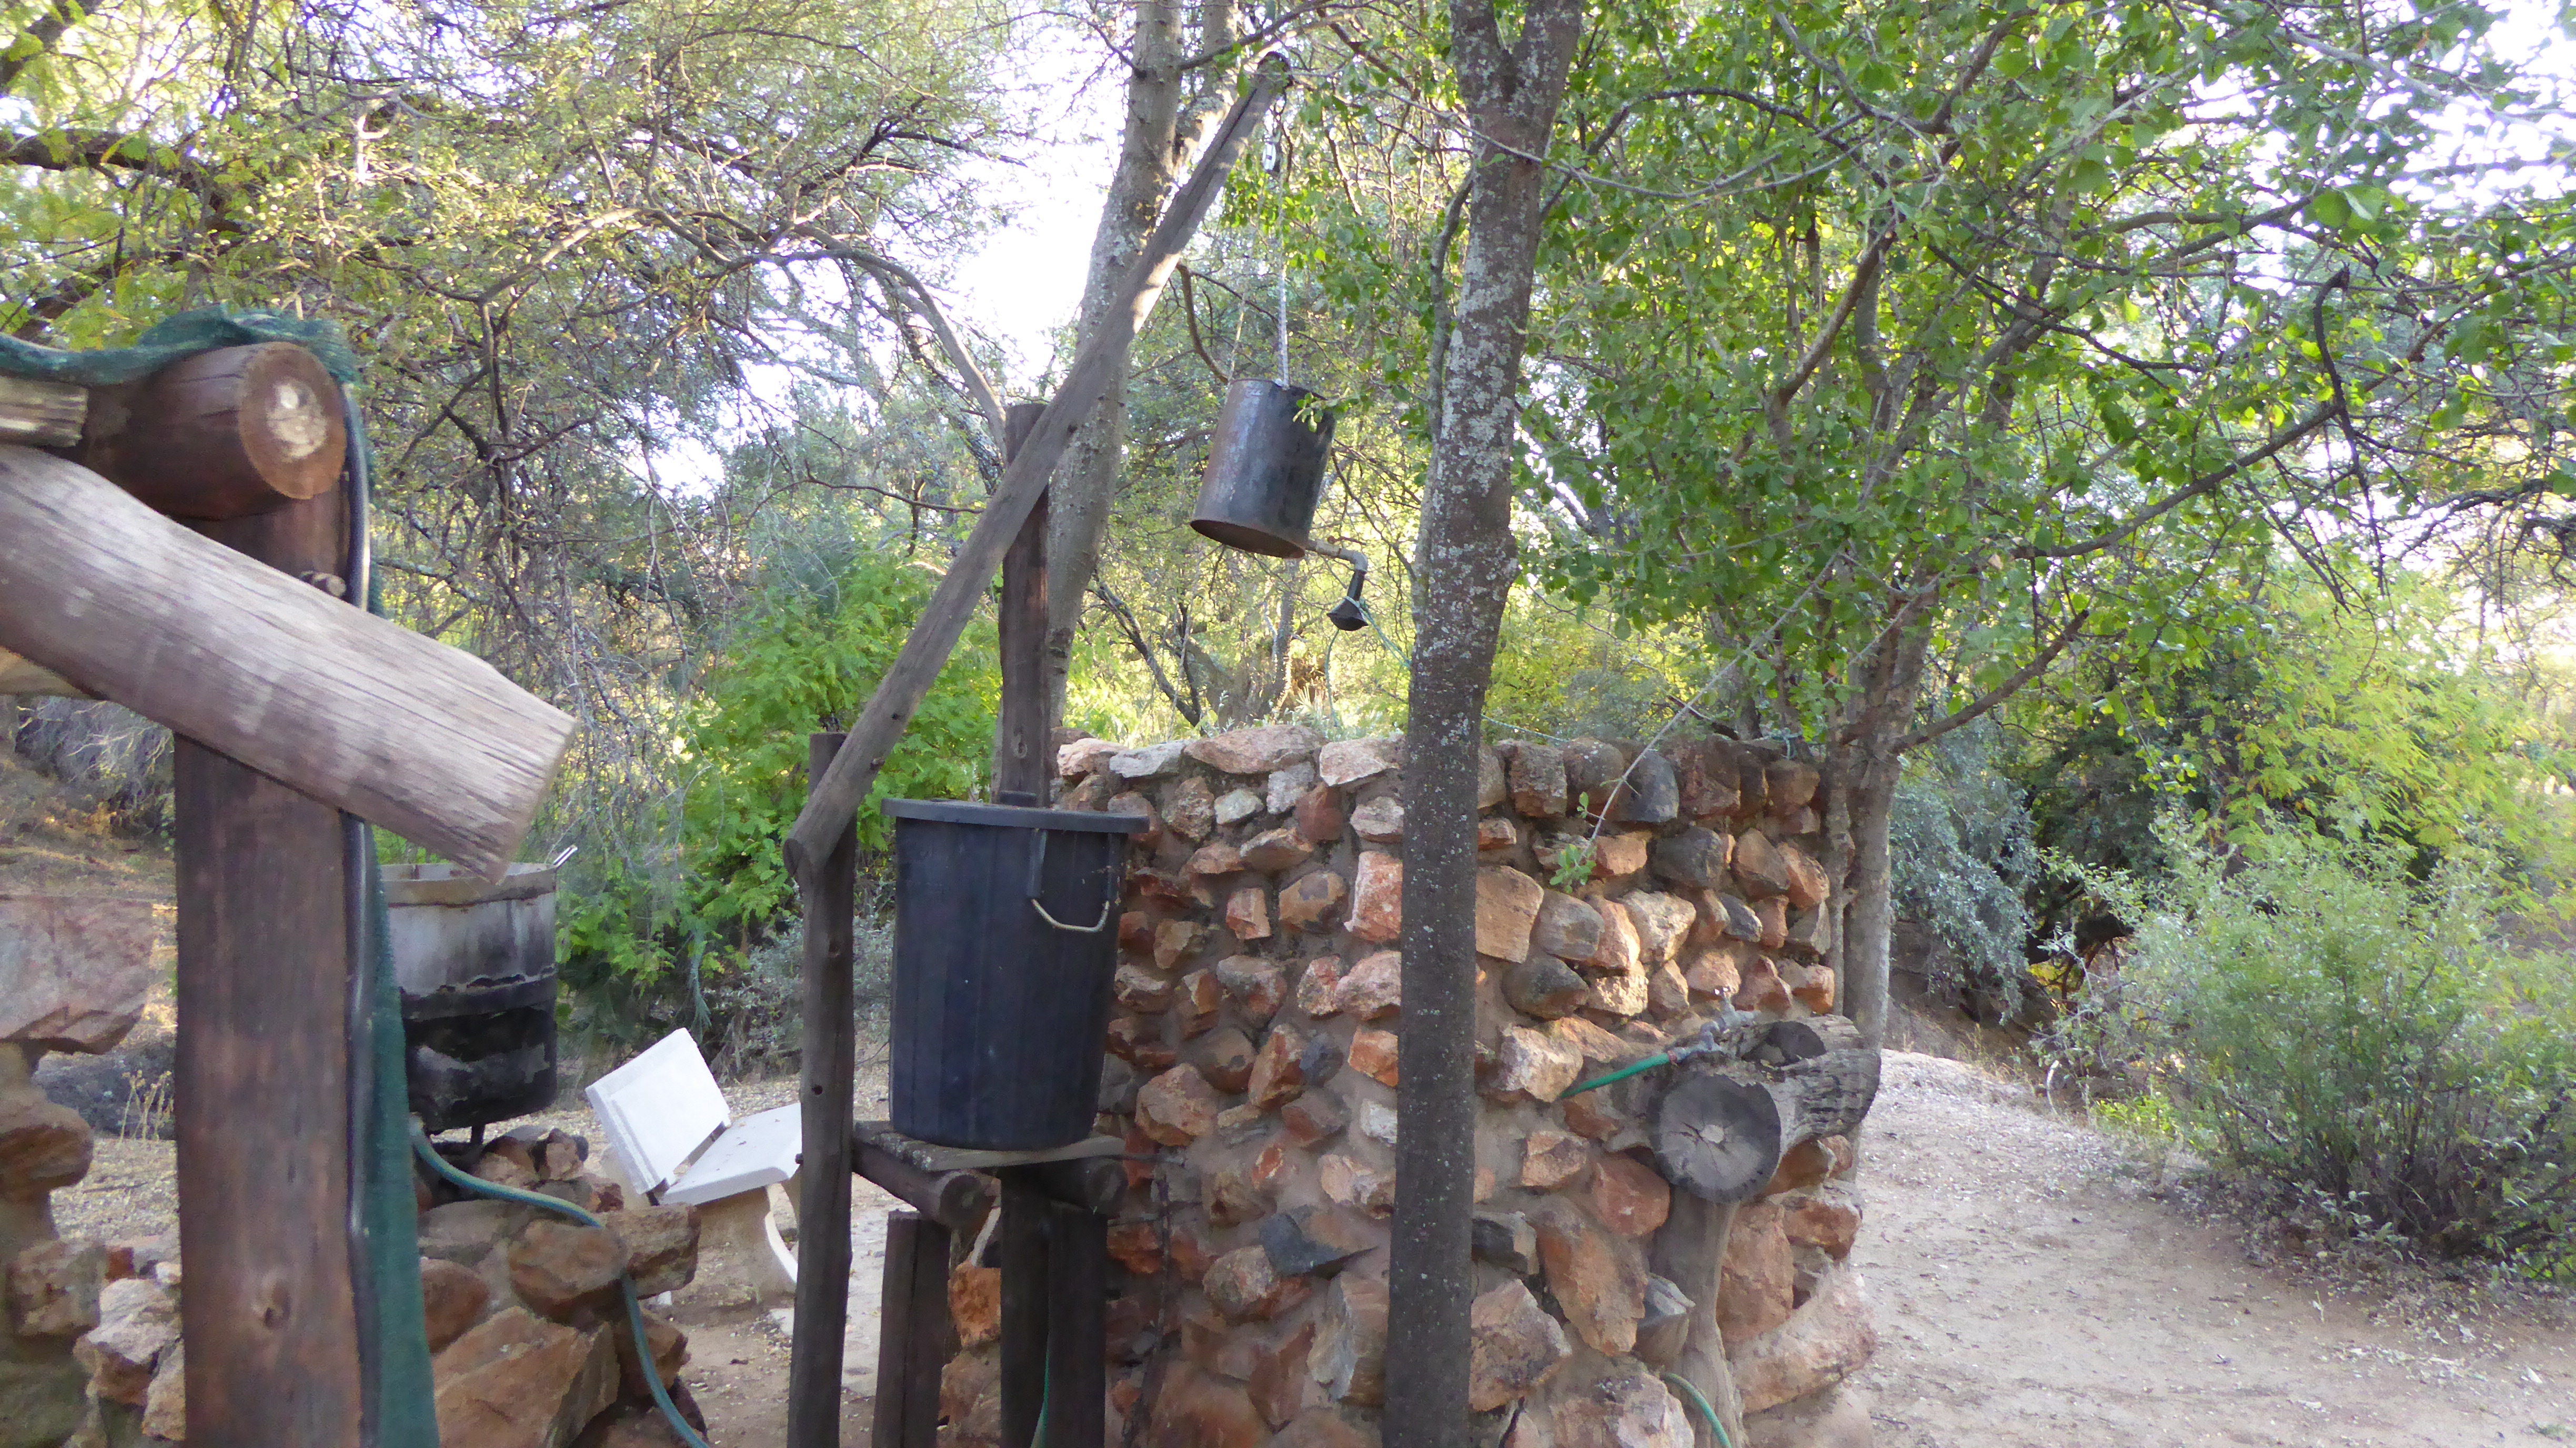 Bush camp shower! large pot you pump water into, and light a fire under. As the water heats it rises up the hose and into the container over your head. Pretty clever!